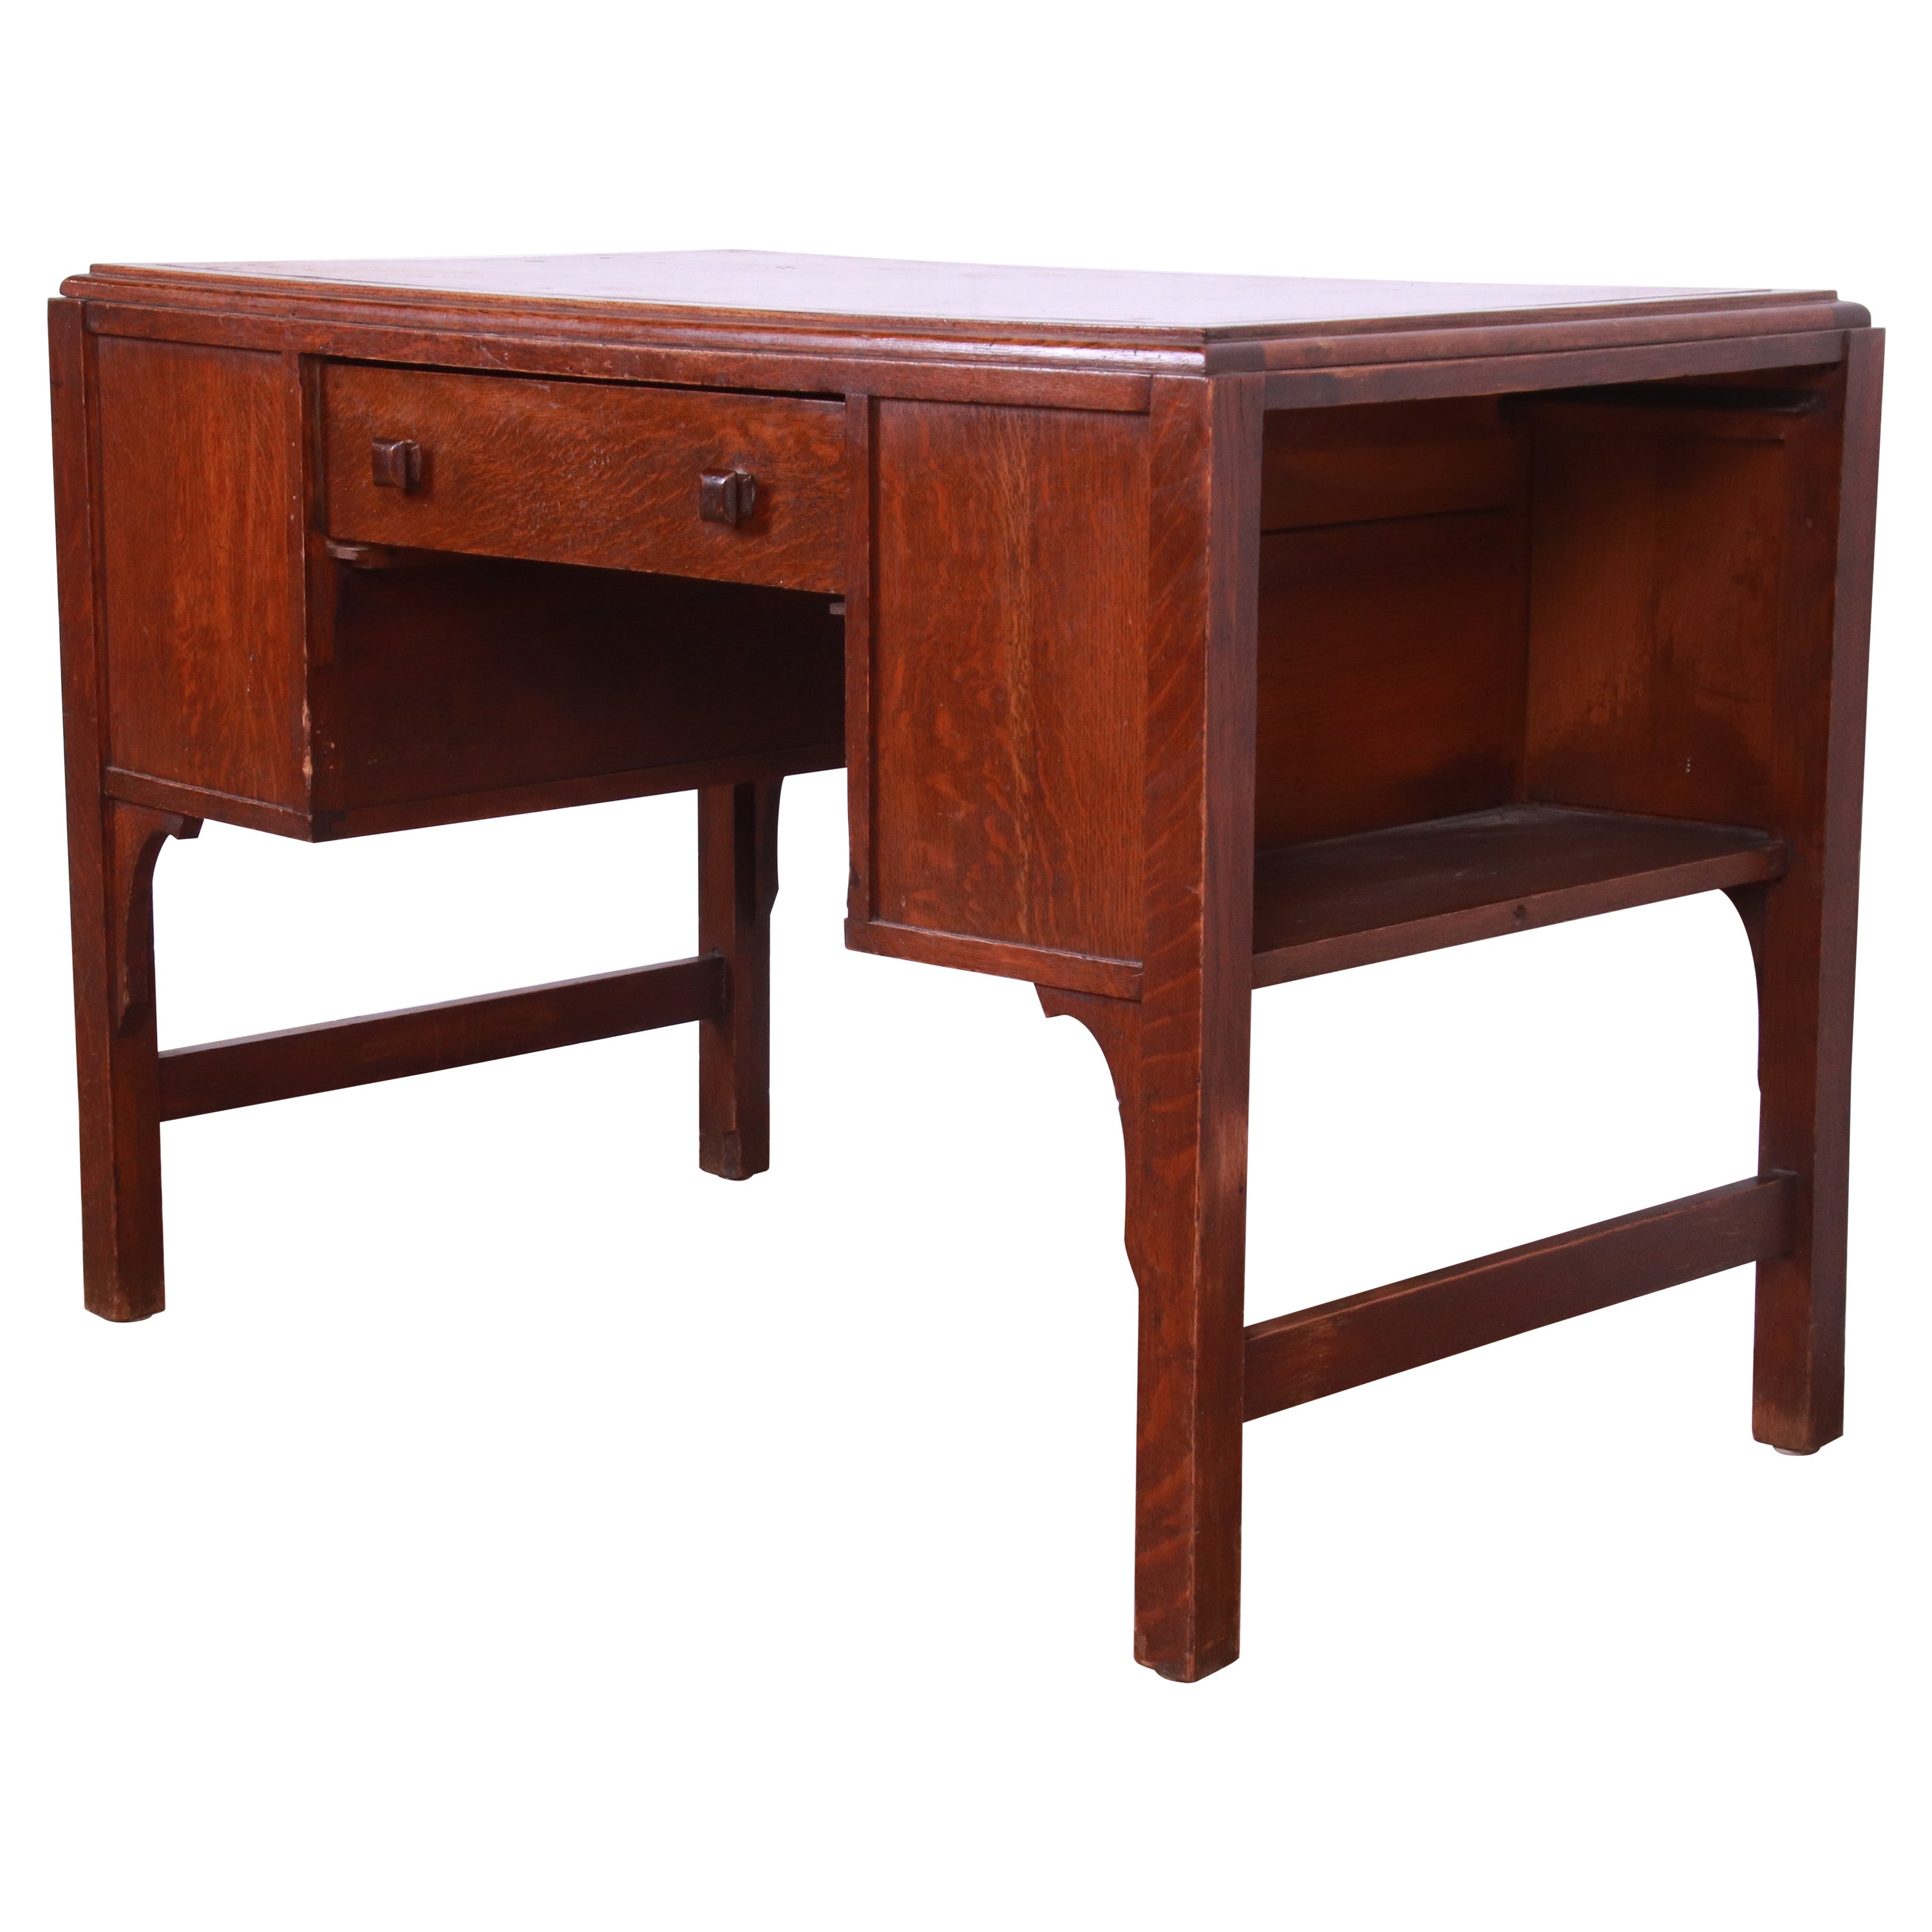 Antique Arts & Crafts Oak Writing Desk From Frank Lloyd Wright's DeRhodes House For Sale